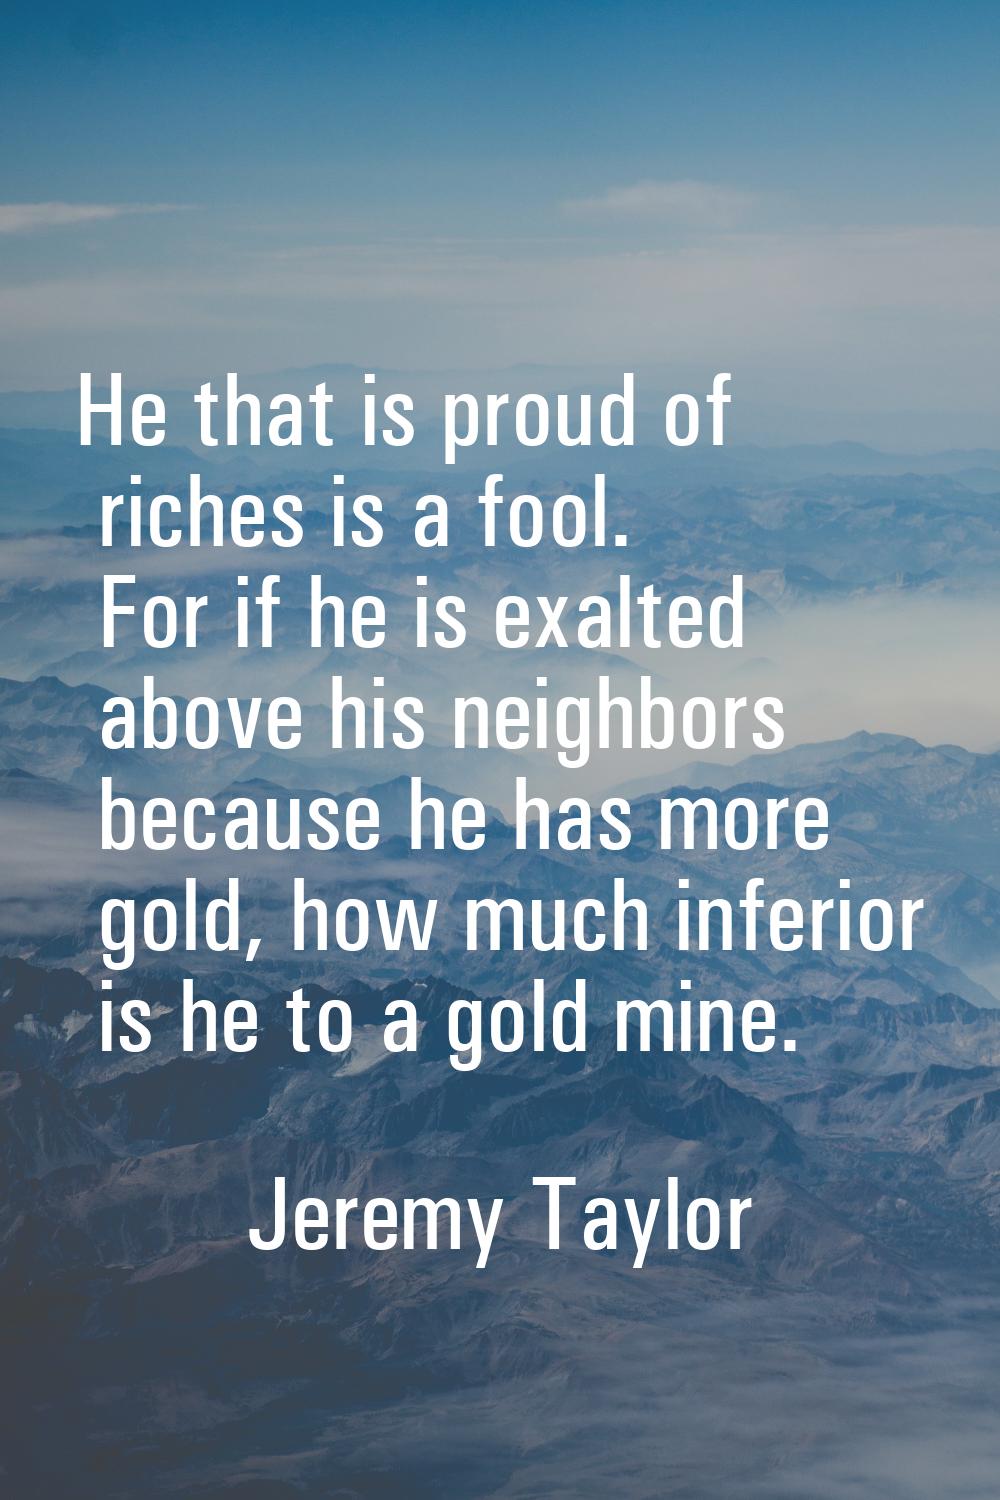 He that is proud of riches is a fool. For if he is exalted above his neighbors because he has more 